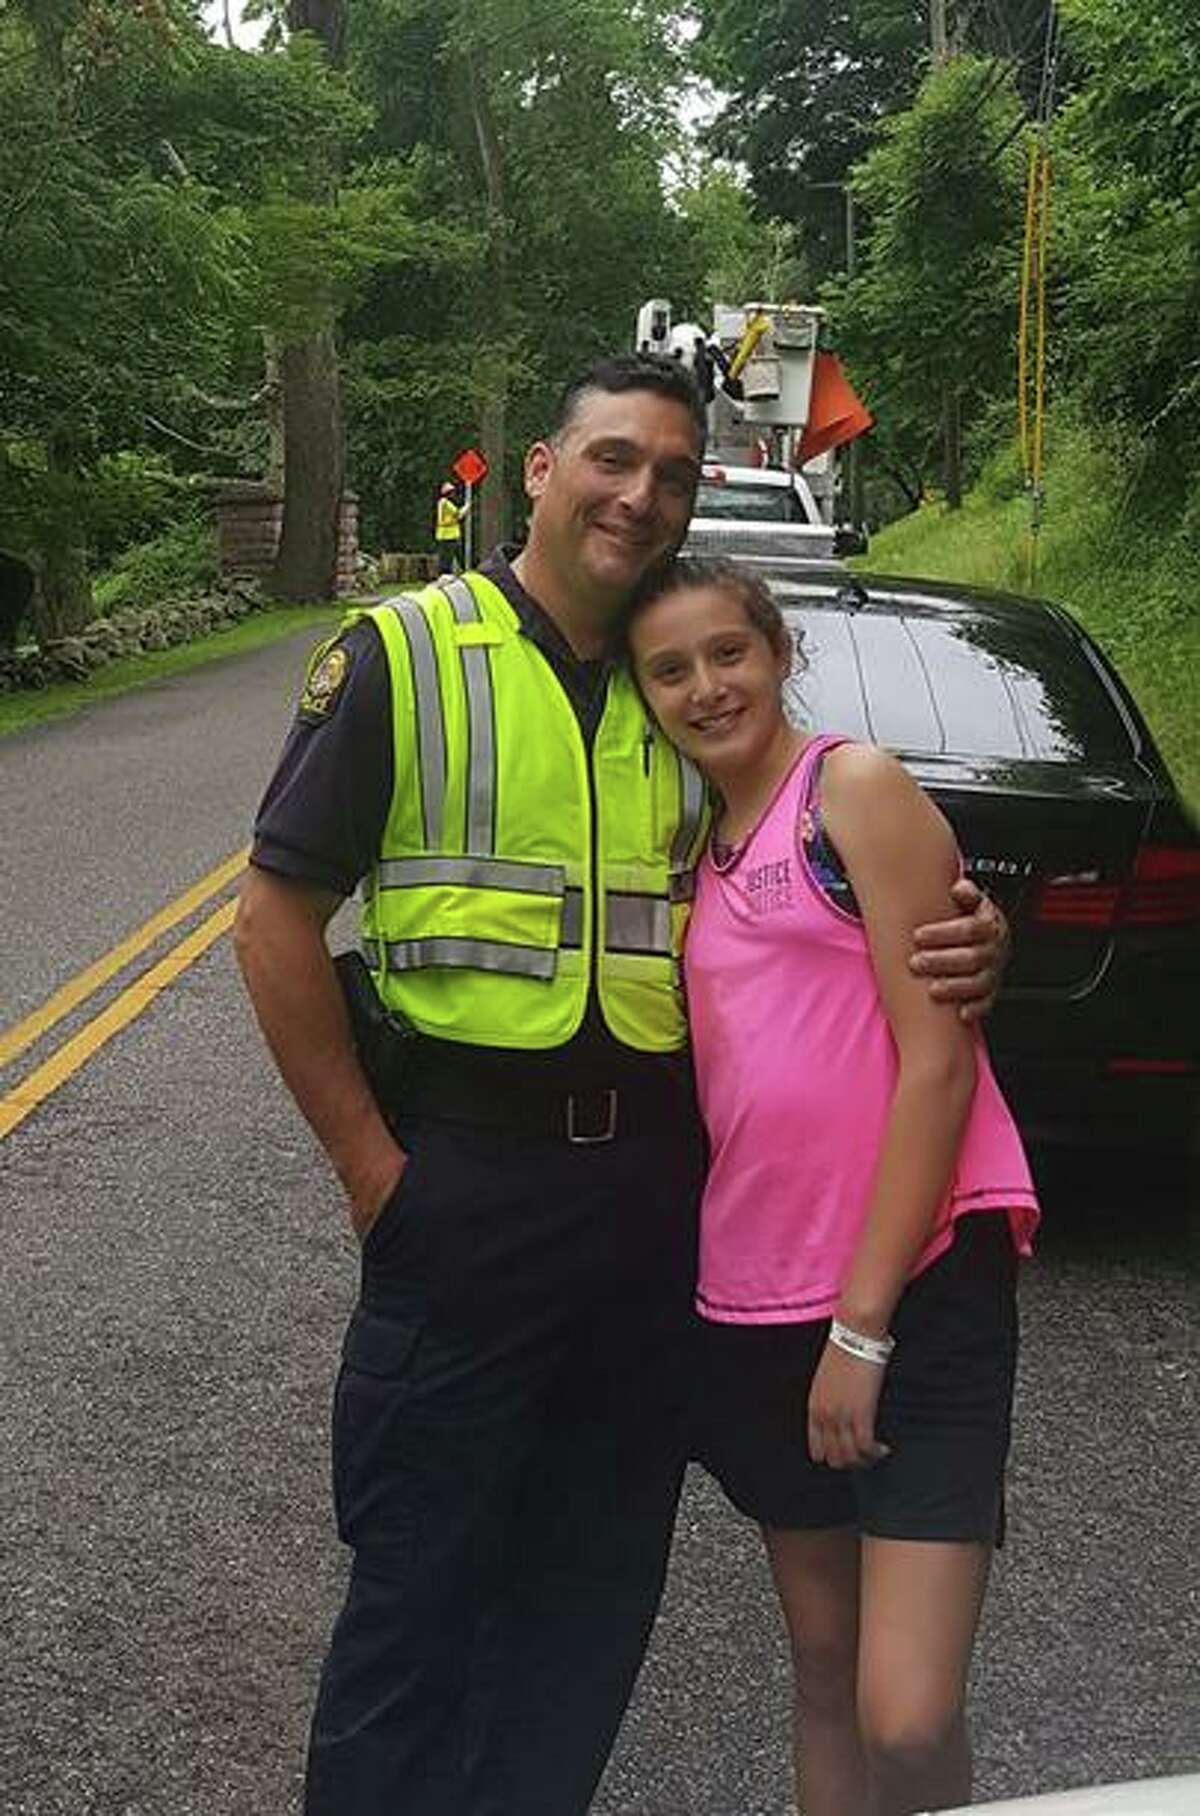 Ava Lombardo, of Newtown, with her dad, Lt. Robert Lombardo of the Greenwich Police Department. Ava will host a lemonade stand in Greenwich on Saturday to benefit the Catherine Violet Hubbard Animal Sanctuary in Newtown.